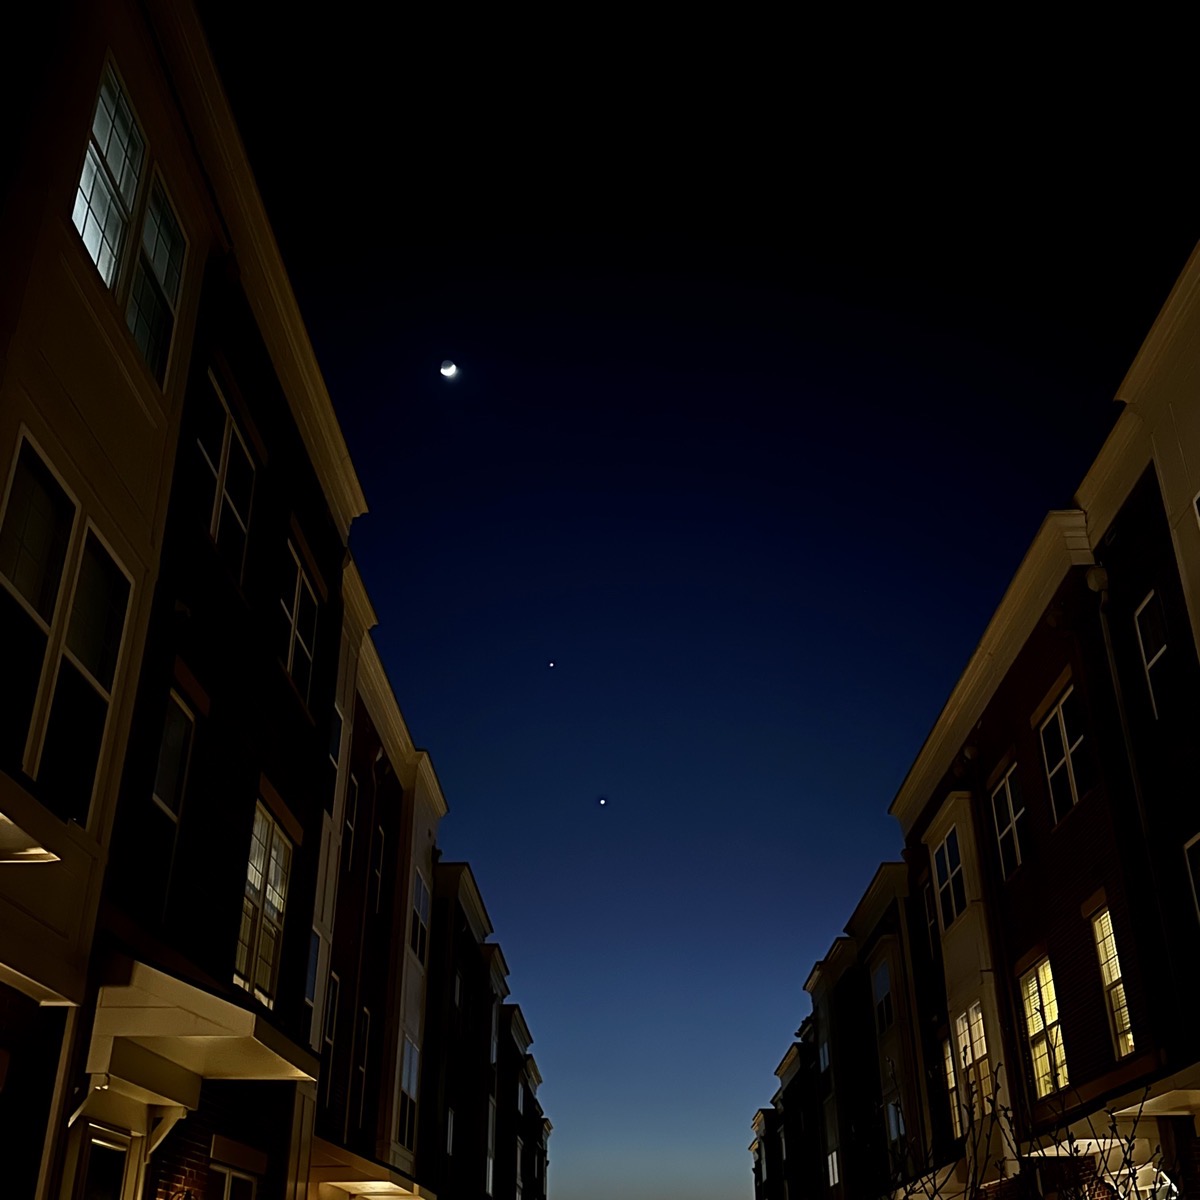 The moon aligned diagonally with Venus and Jupiter between brick townhomes.